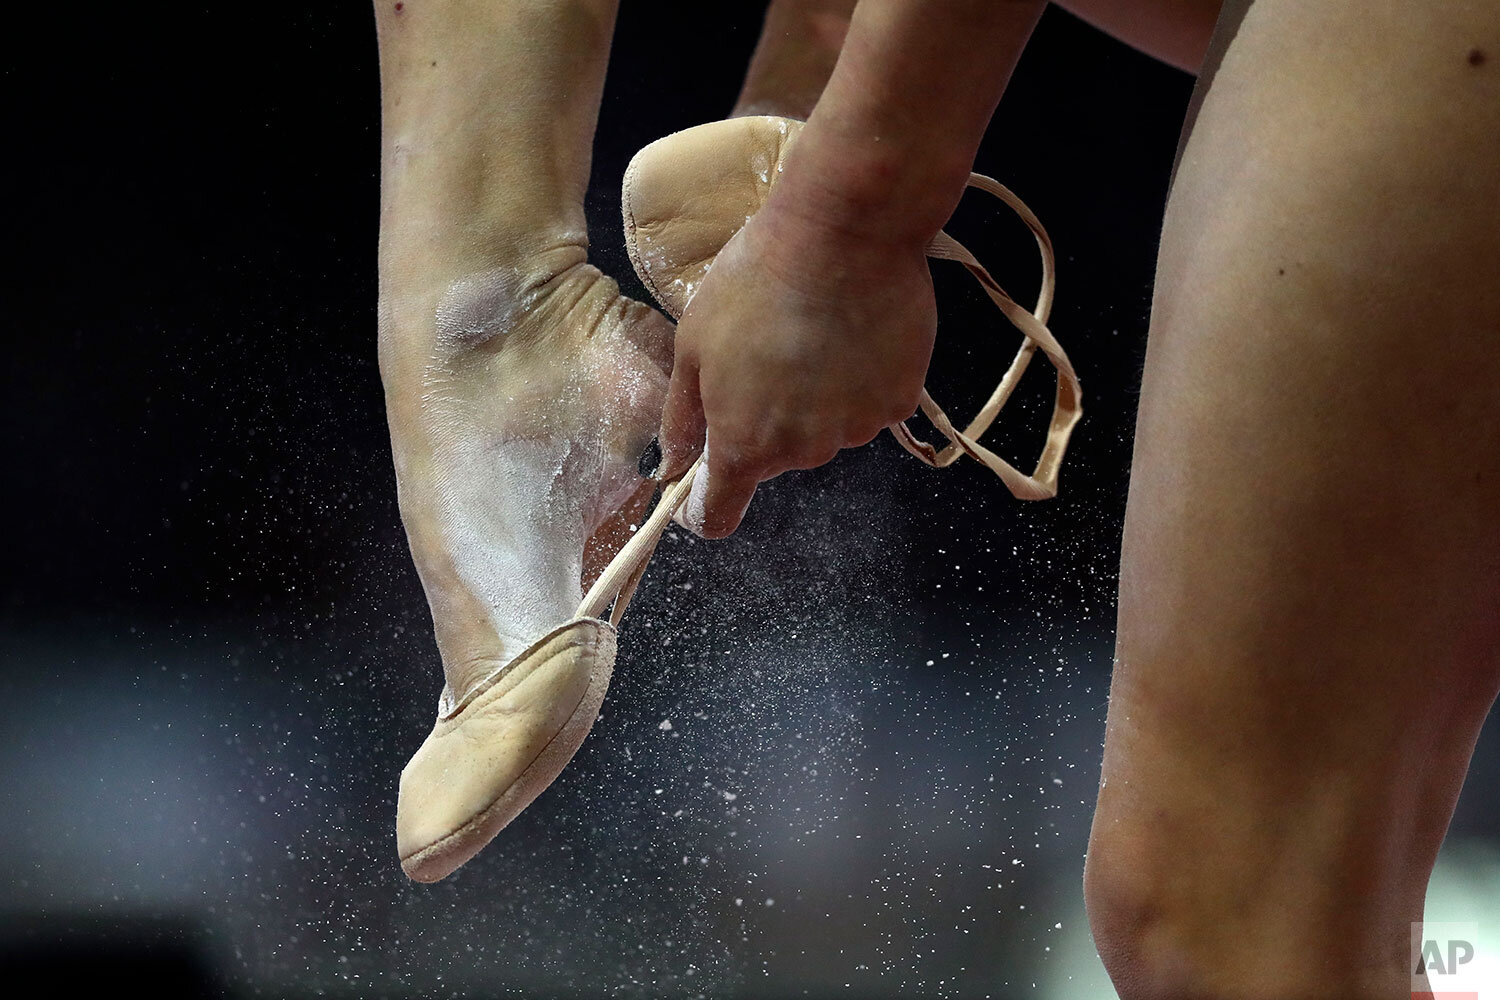  Diana Varinska of Ukraine puts on her shoes to perform on the floor in the women's all-around final at the Gymnastics World Championships in Stuttgart, Germany, Thursday, Oct. 10, 2019. (AP Photo/Matthias Schrader) 